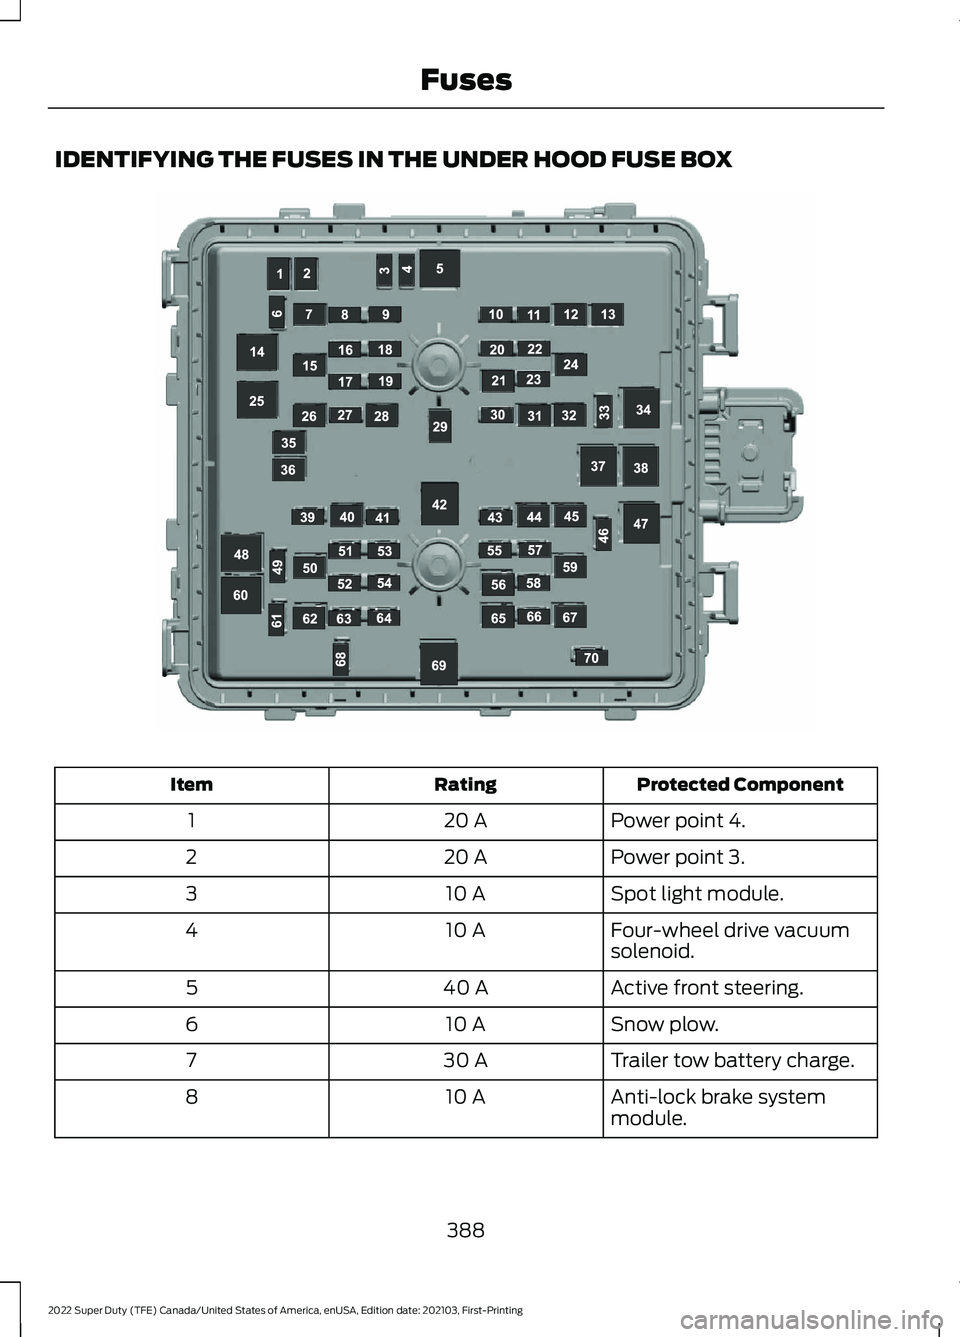 FORD F-600 2022  Owners Manual IDENTIFYING THE FUSES IN THE UNDER HOOD FUSE BOX
Protected Component
Rating
Item
Power point 4.
20 A
1
Power point 3.
20 A
2
Spot light module.
10 A
3
Four-wheel drive vacuum
solenoid.
10 A
4
Active f